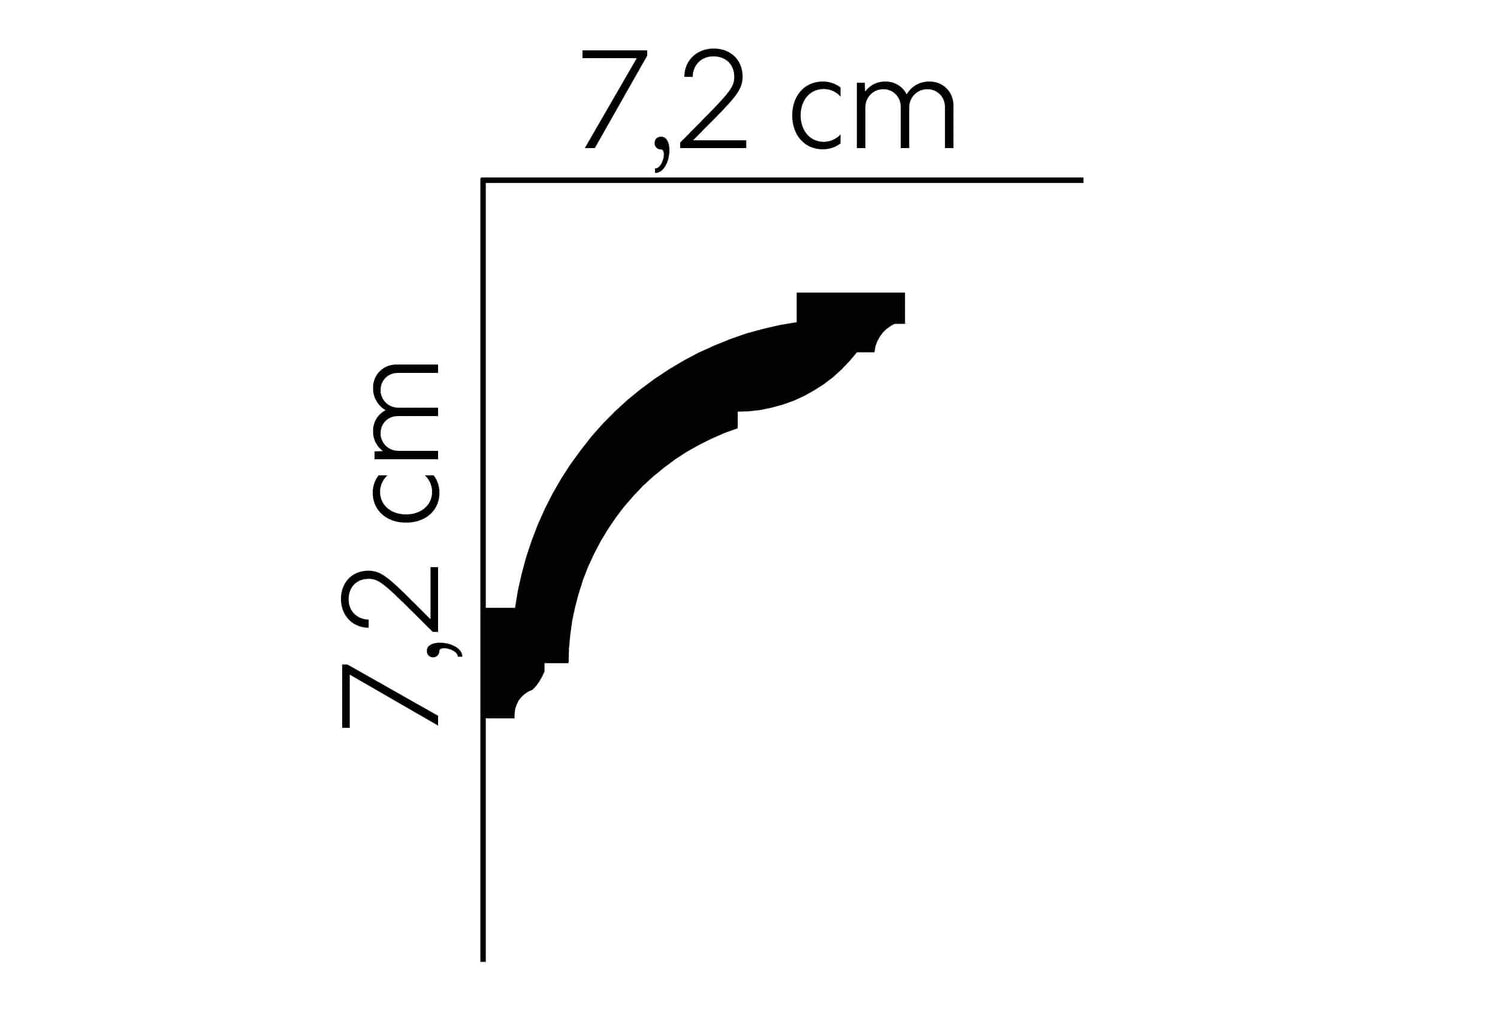 MD367 - Modern Coving's 7.2cm height and depth